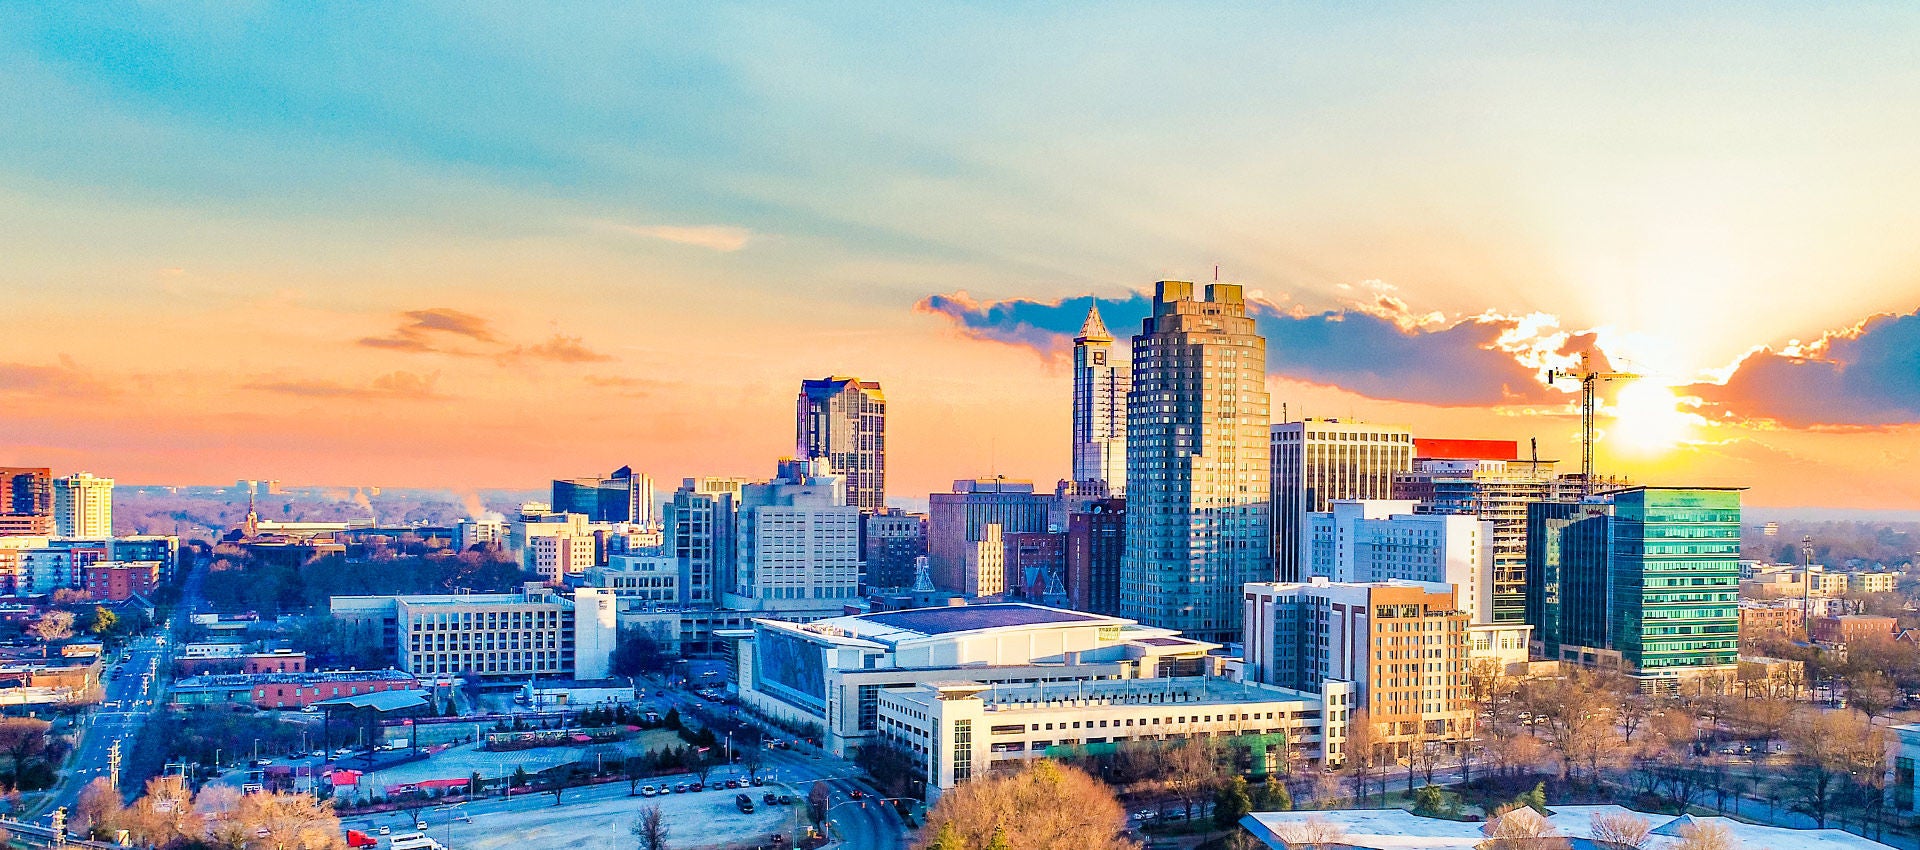 A colorful sunset fills the sky around downtown Raleigh, North Carolina.